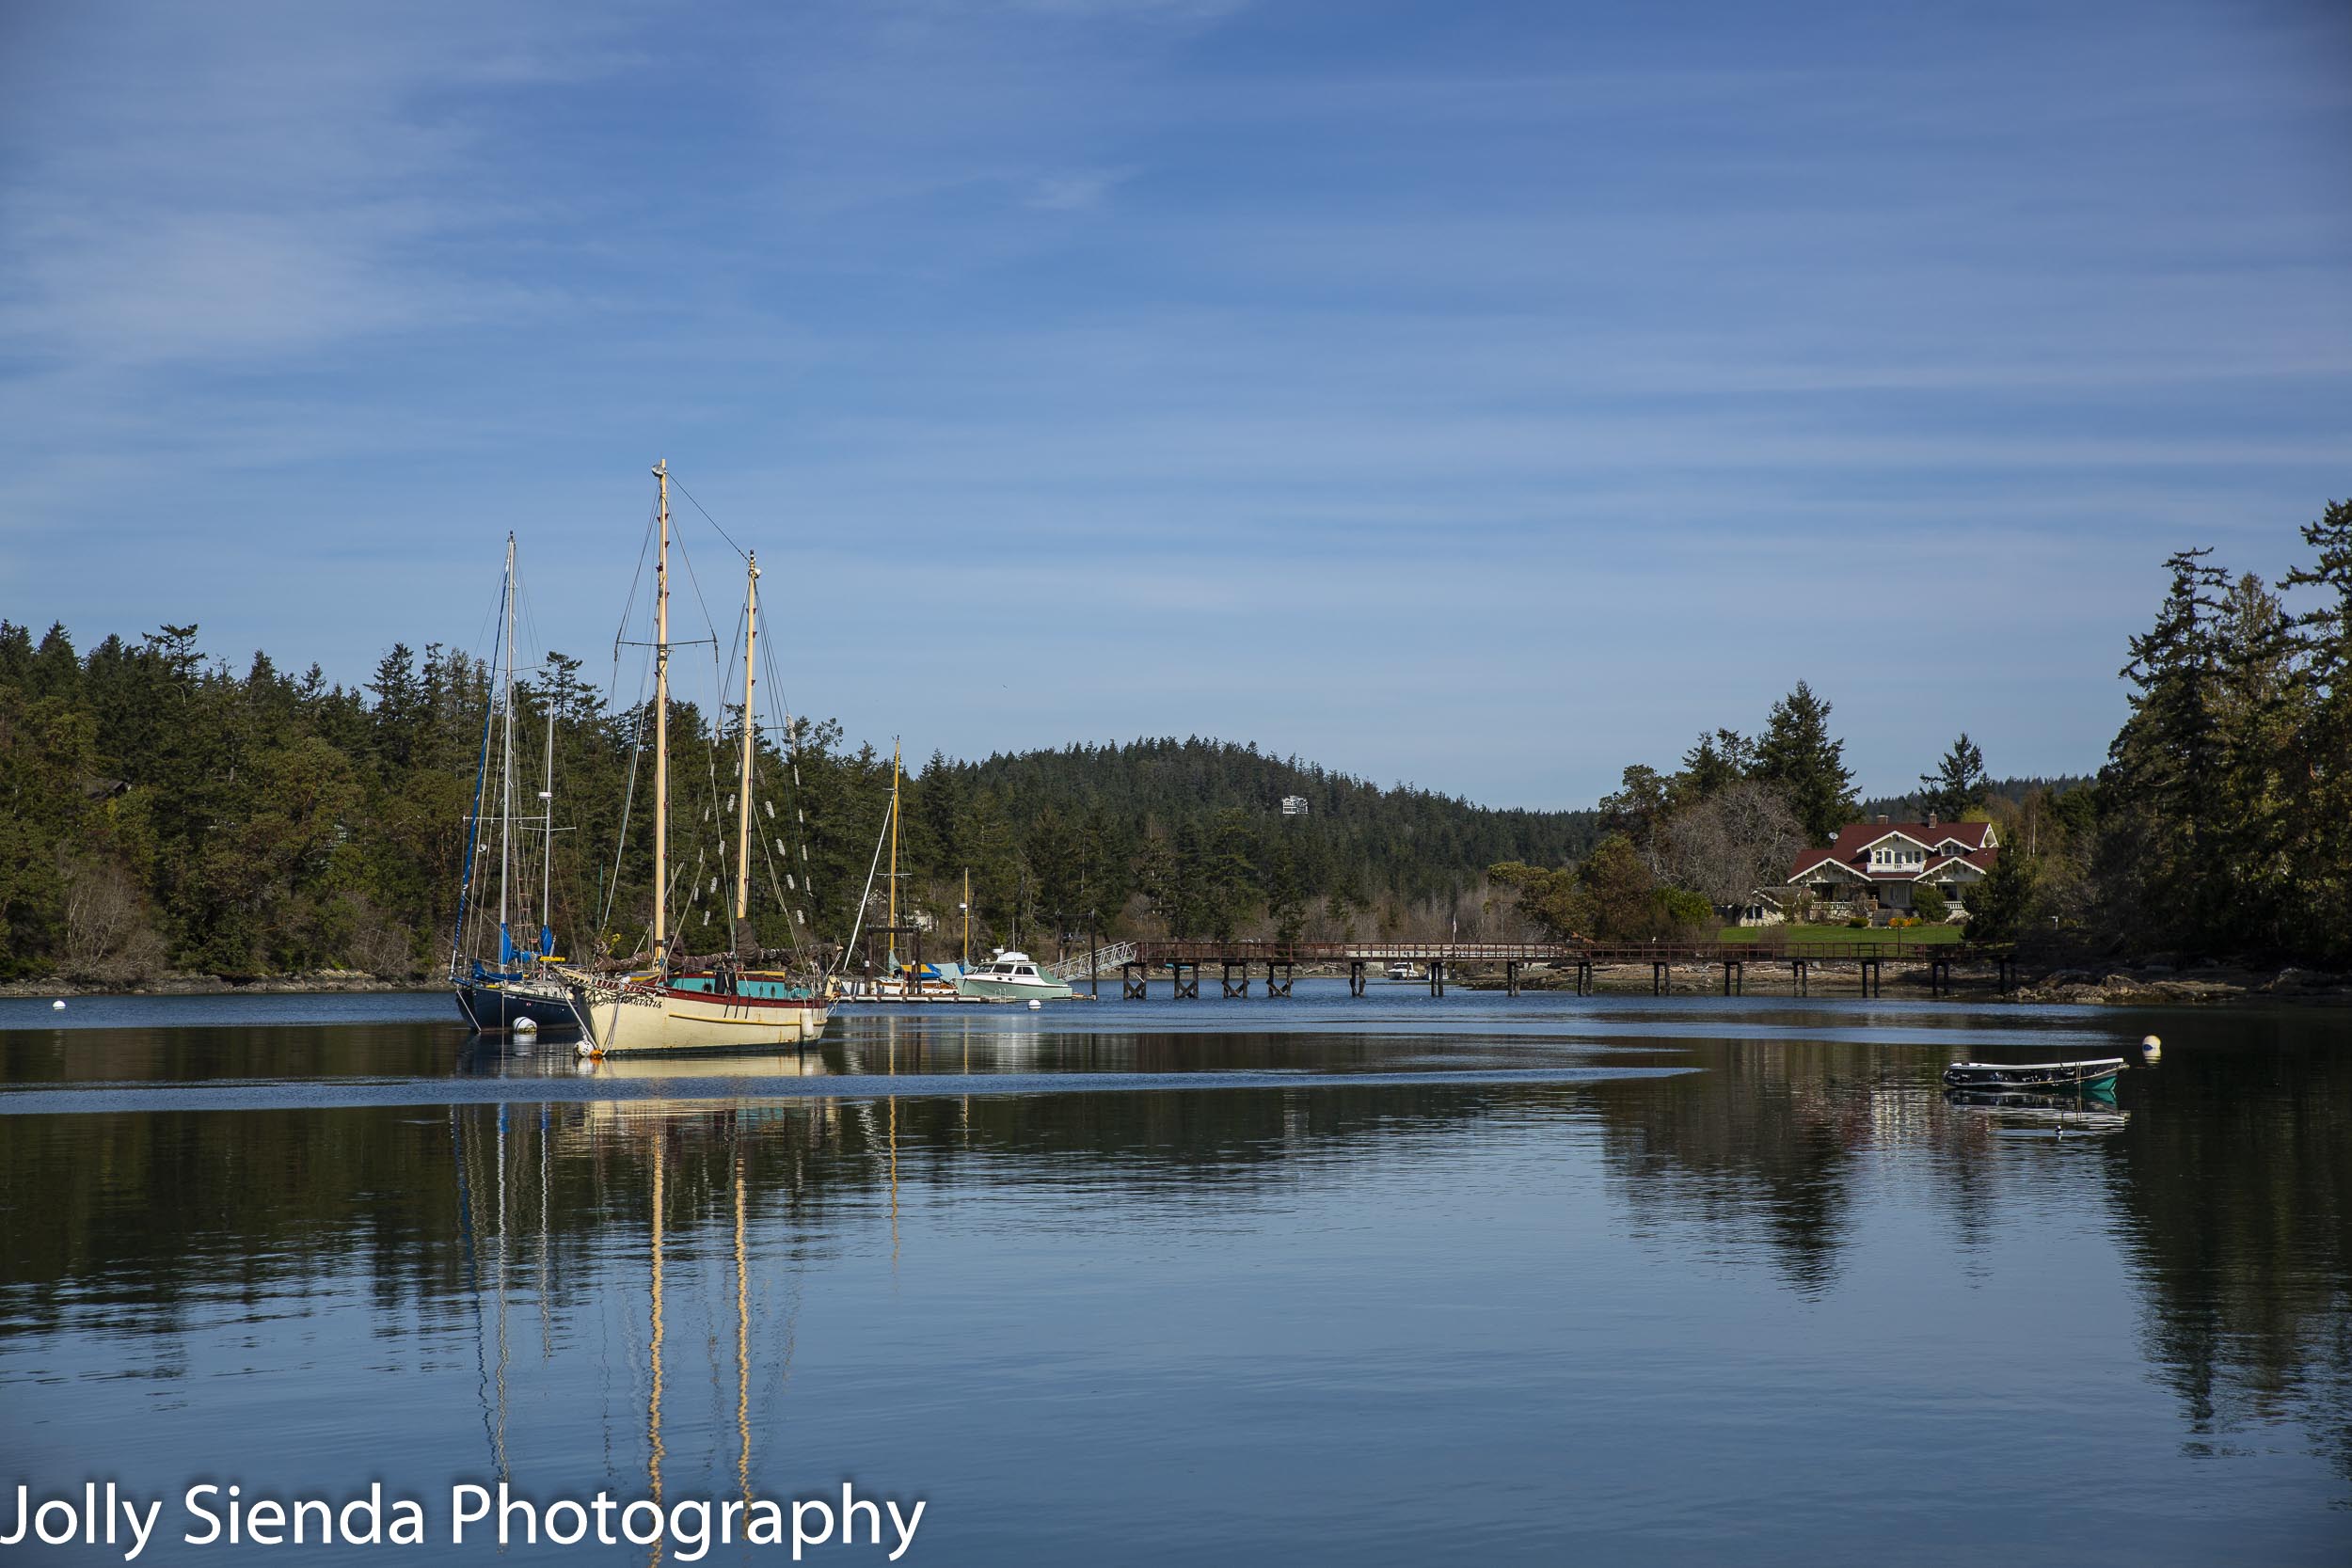 Calm on the water inlet with boats and sailboats